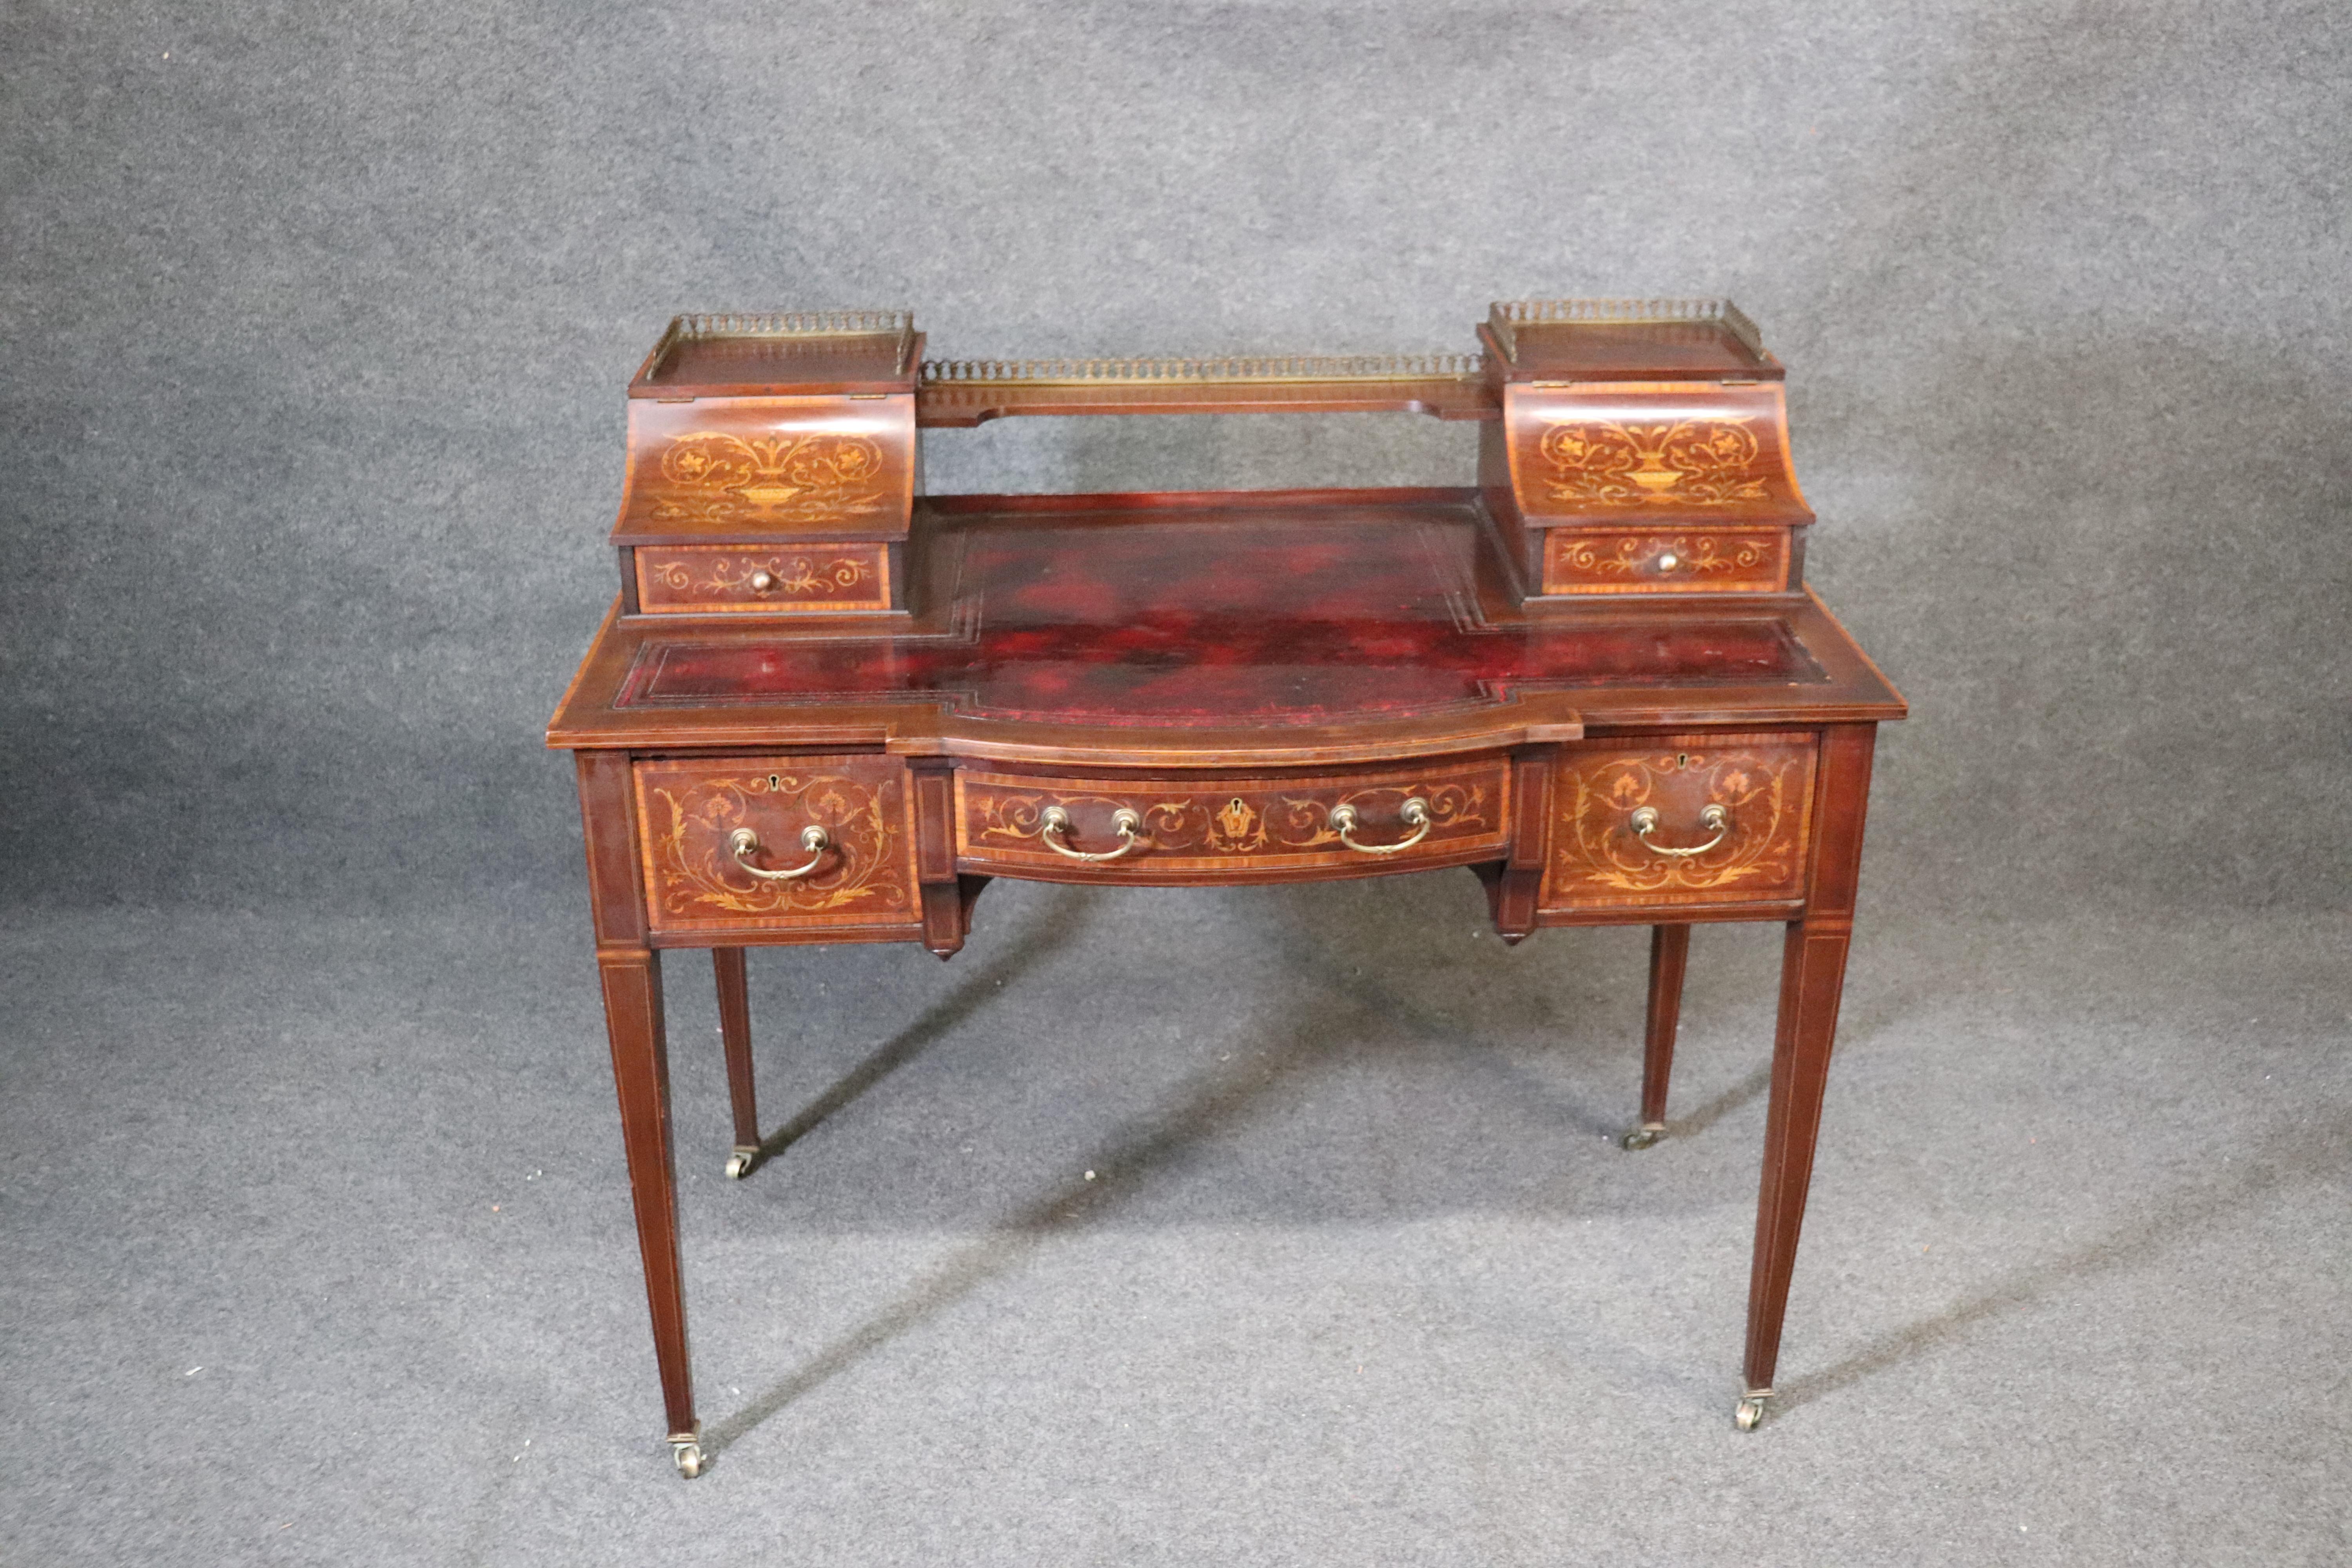 This is a gorgeous inlaid mahogany Edwardian desk. The desk is in good antique condition with minor signs of wear and age as shown. The desk measures: 37 tall x 42 wide x 24 deep.